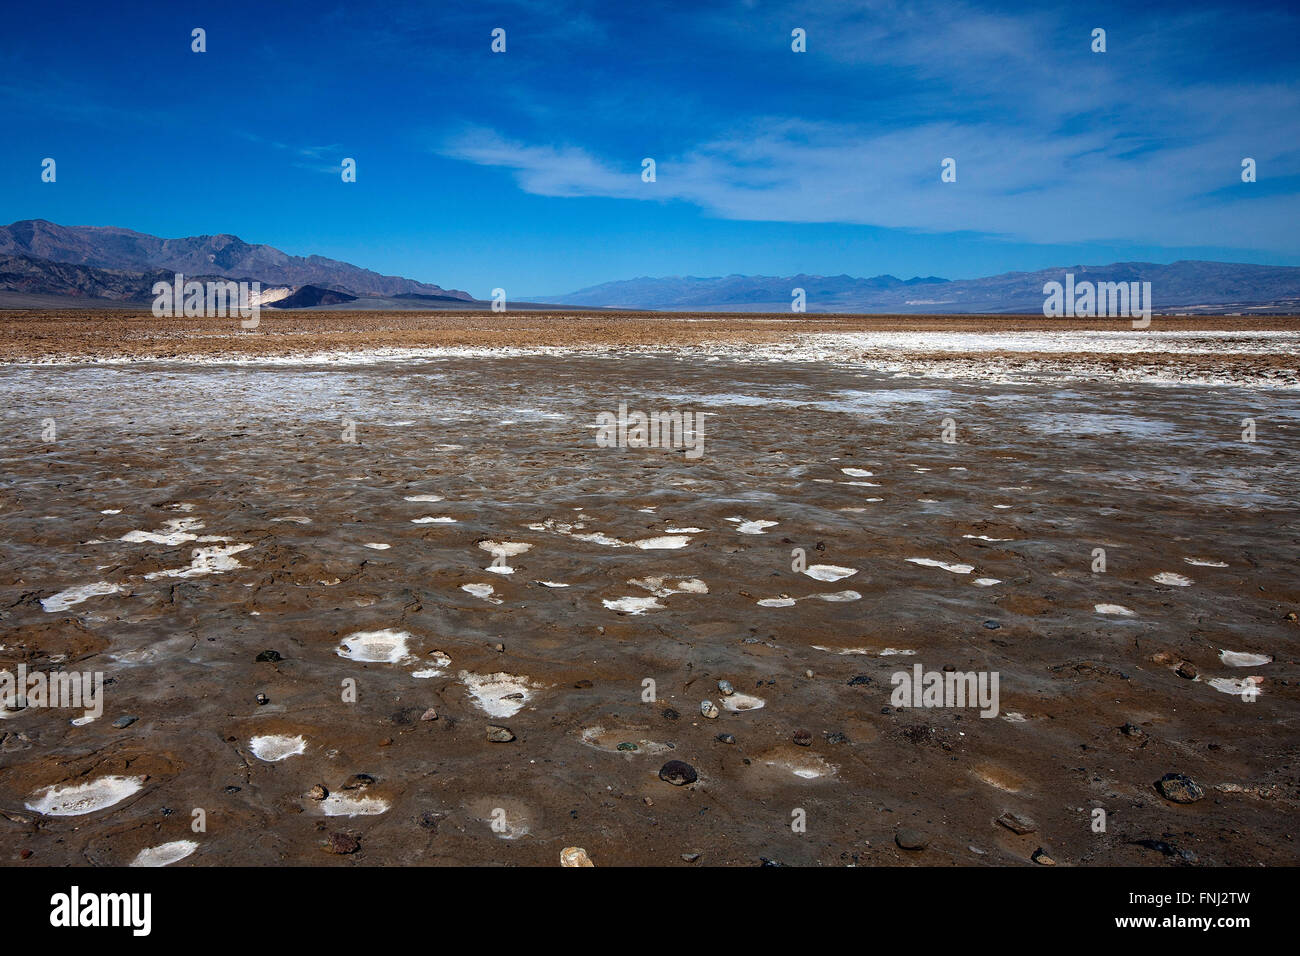 Devil's Golf Course Salt Flats, Death Valley National Park, California, United States of America Banque D'Images